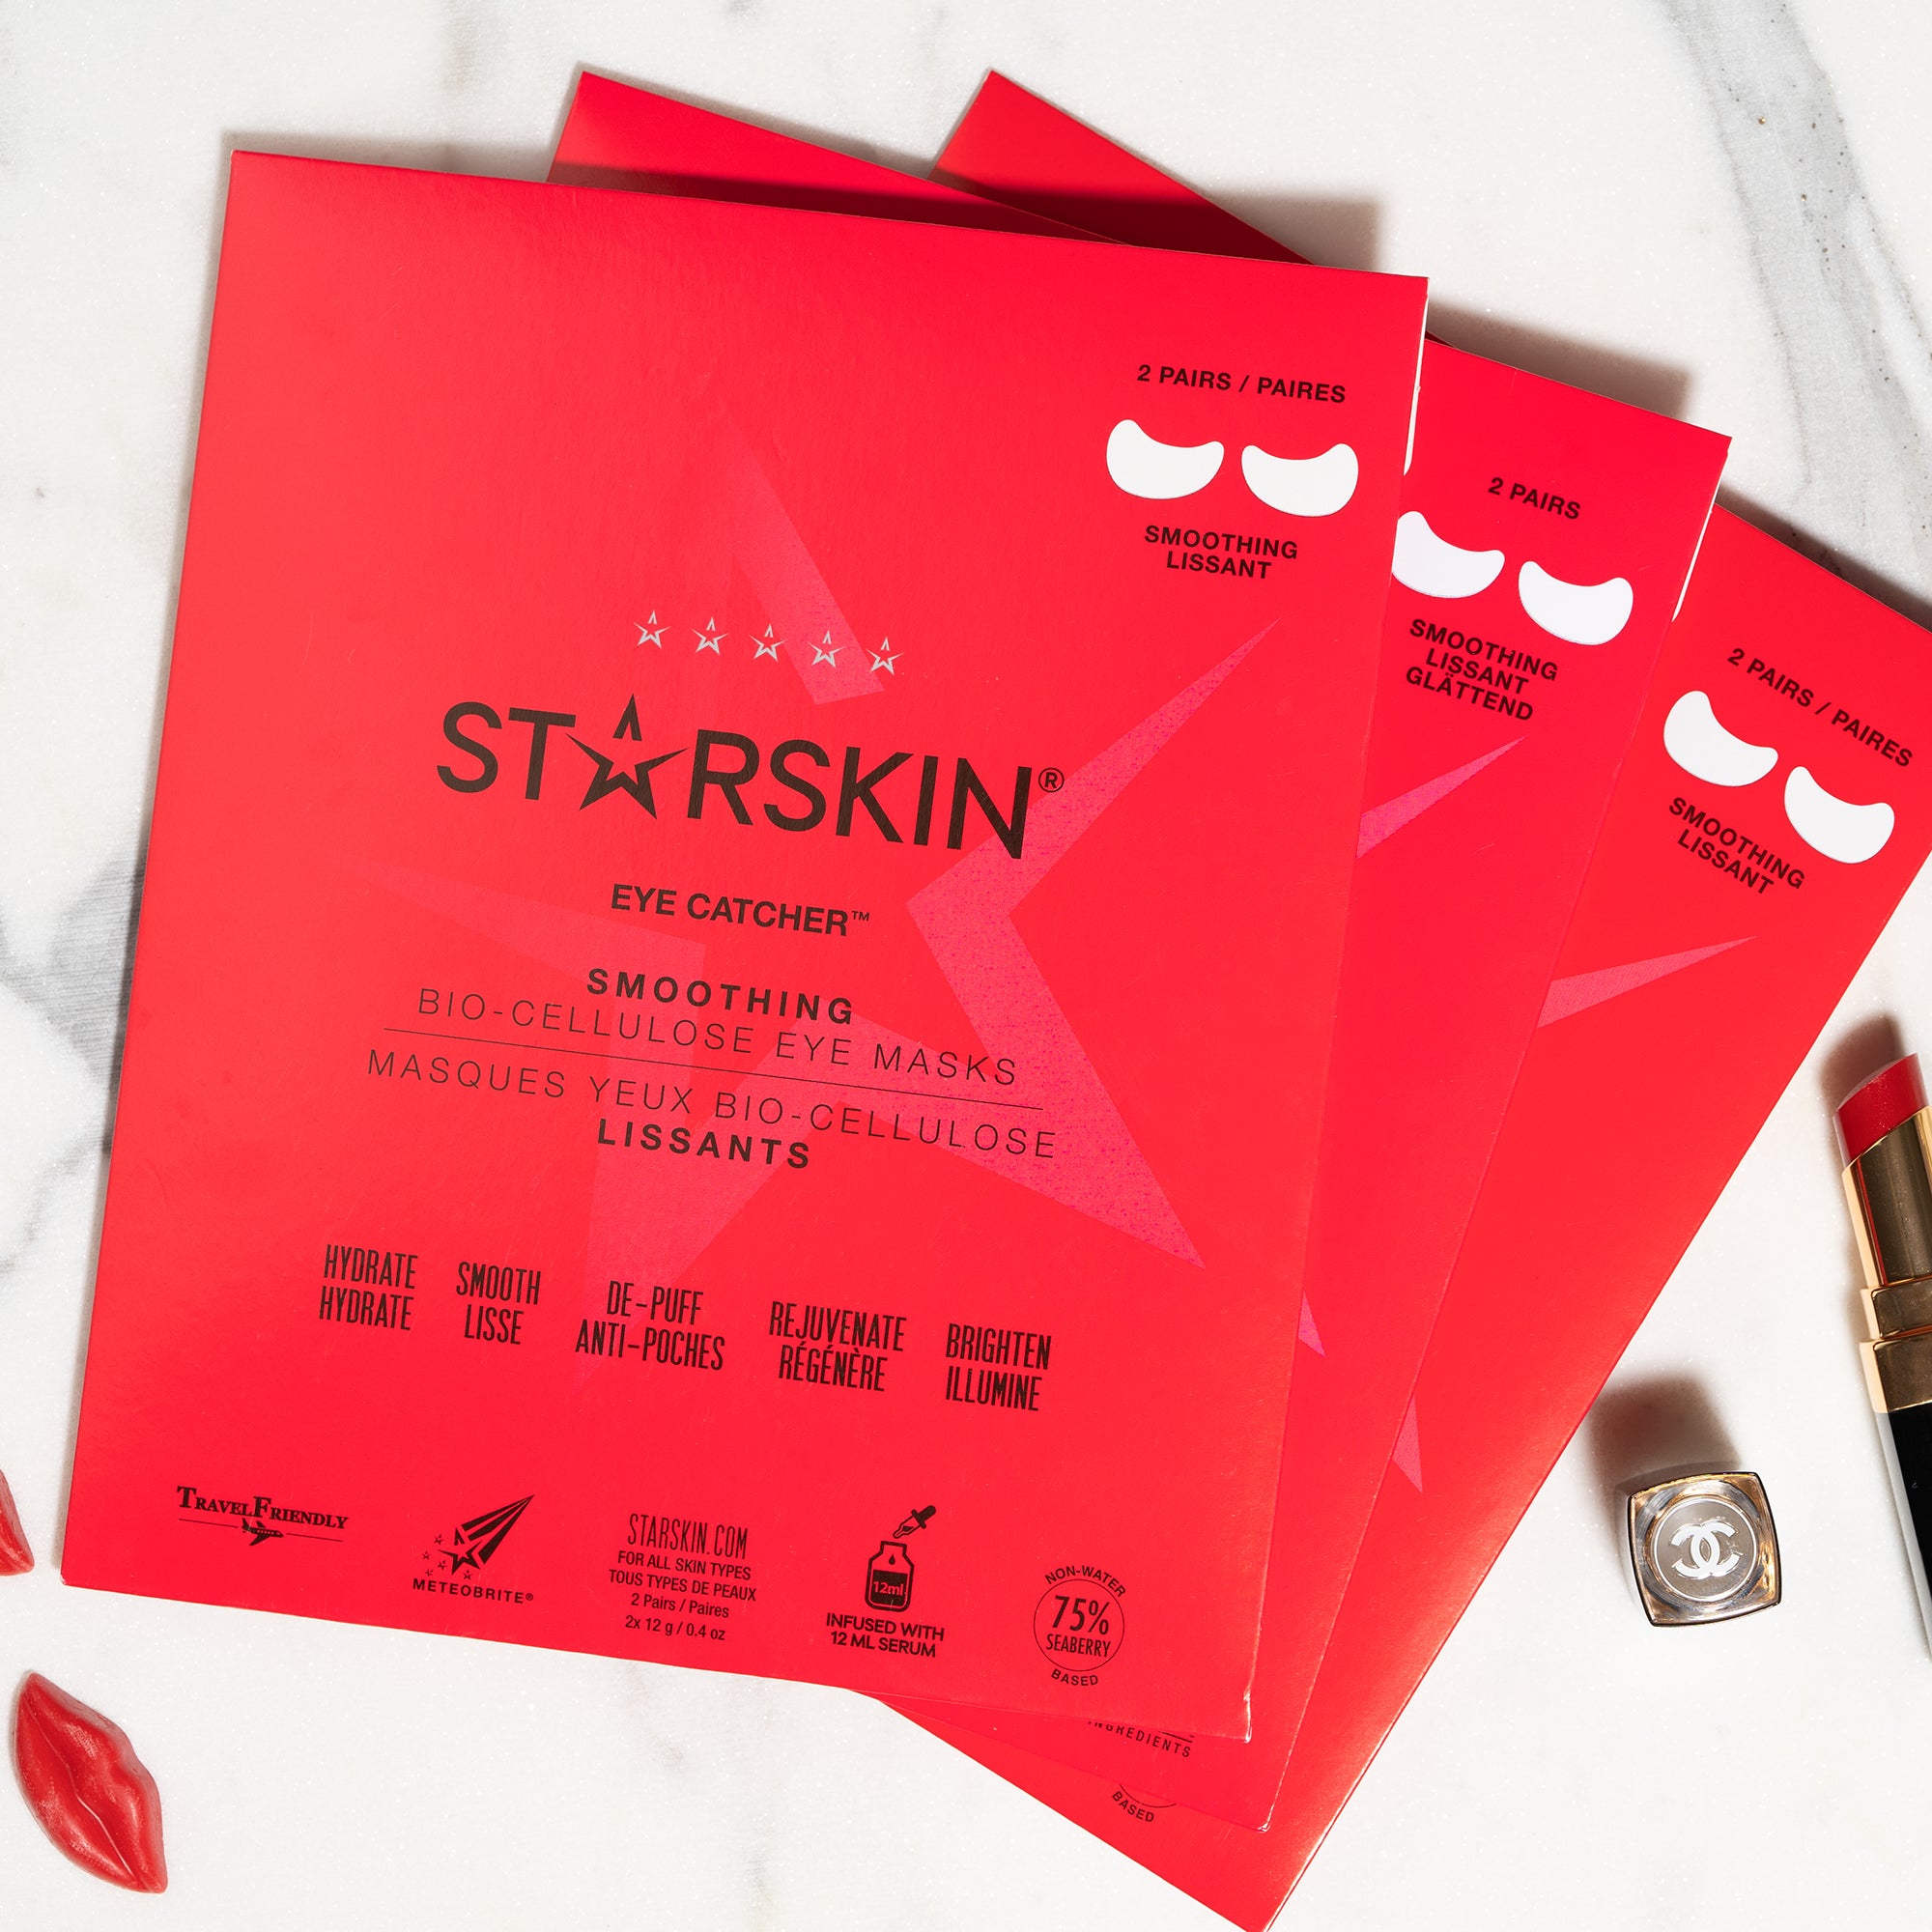 Starskin's Eye Catcher product being displayed while on a marble table. 